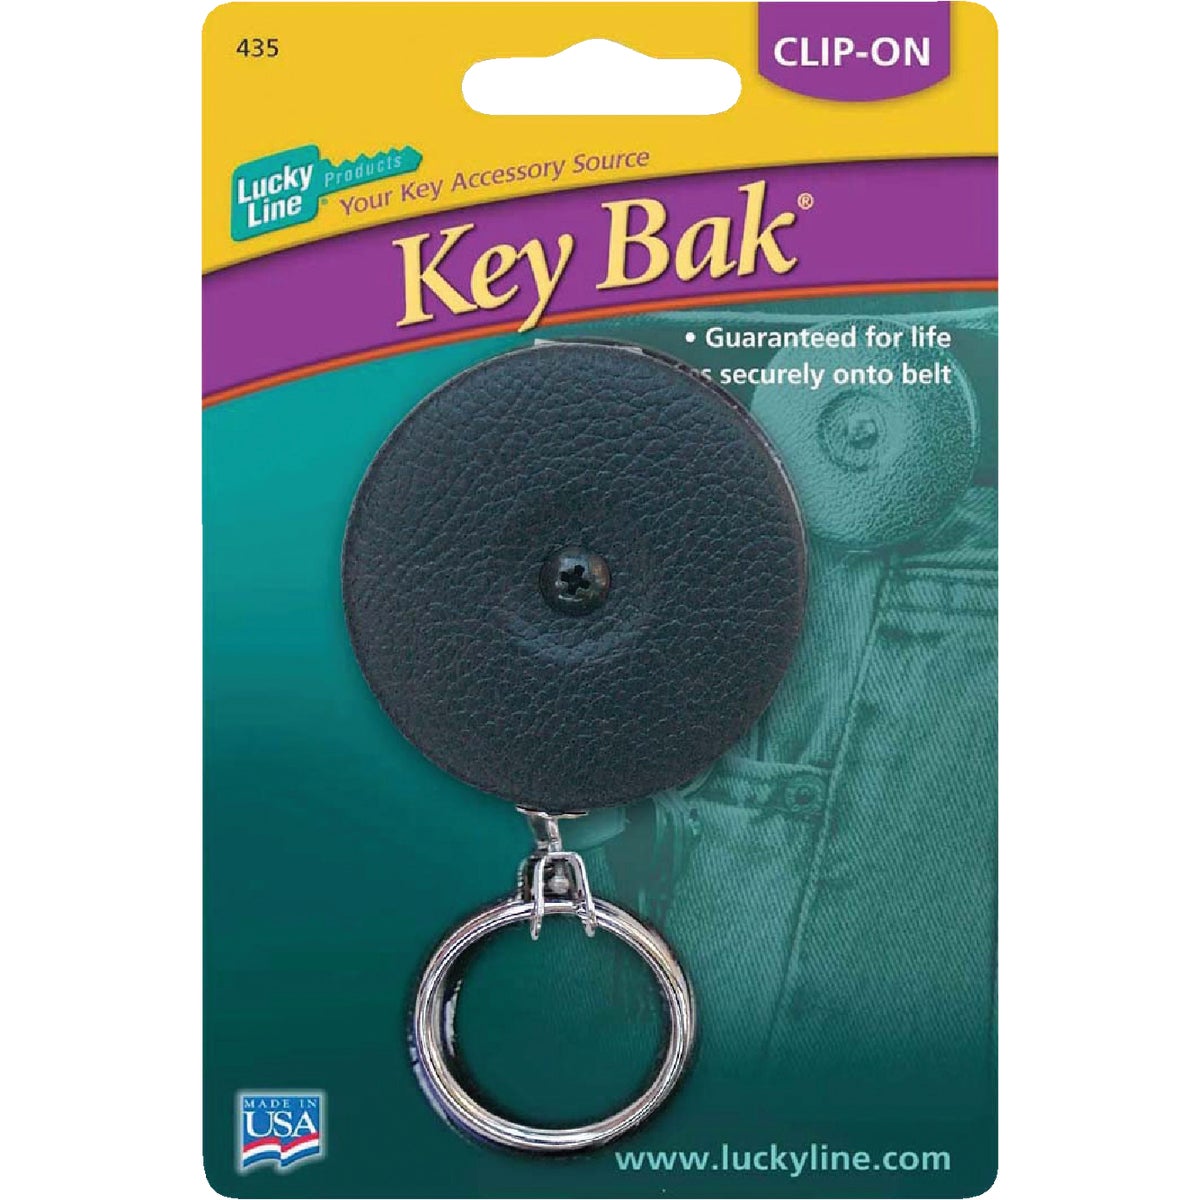 Item 577478, High-quality key reel with 24-inch retractable pull of flat, linked steel 